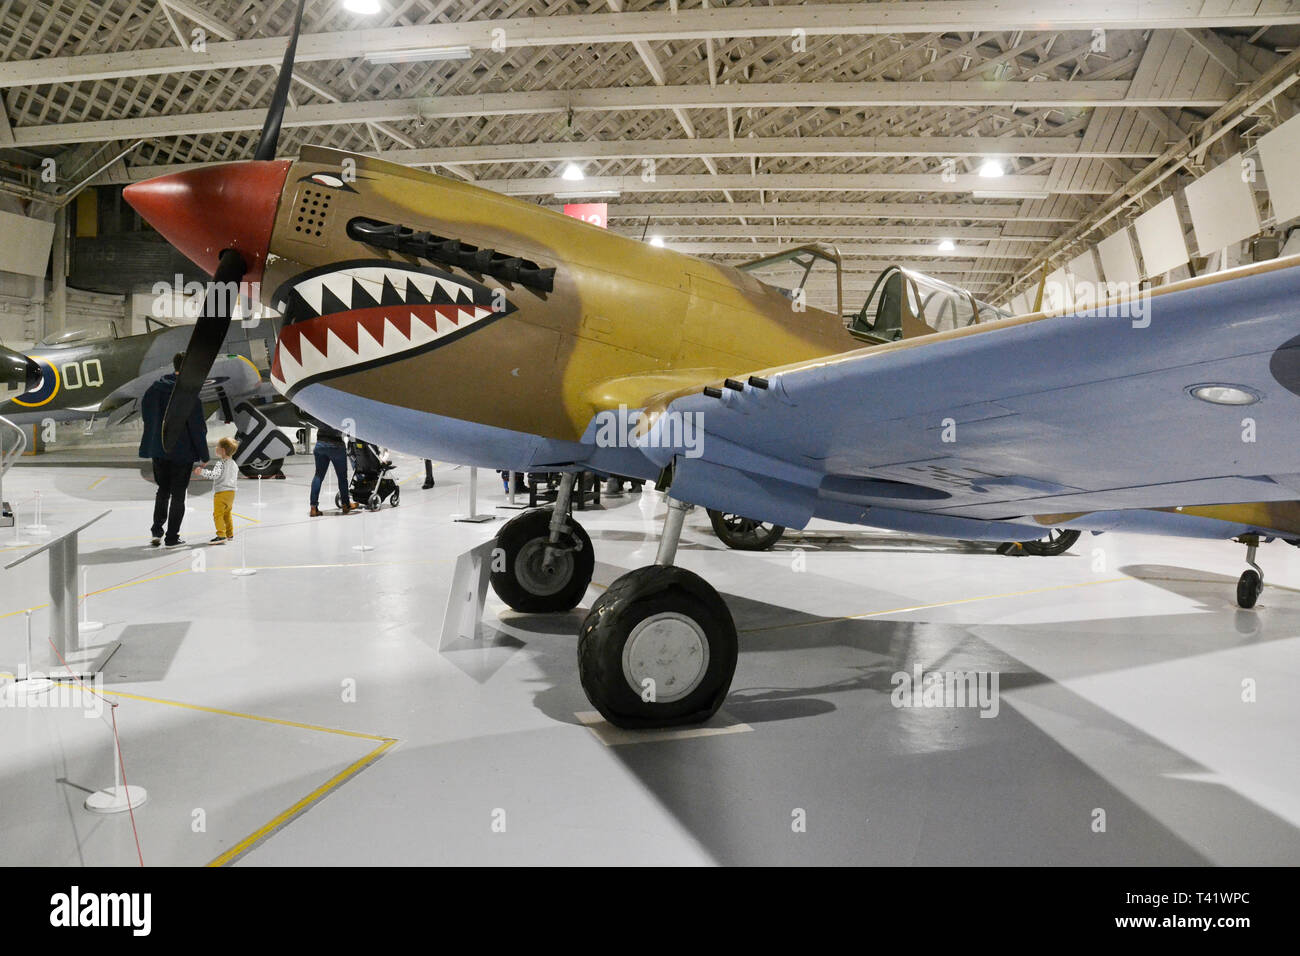 Curtiss P-40 Kittyhawk WWII Military Aircraft on display at the RAF Museum, London, UK Stock Photo